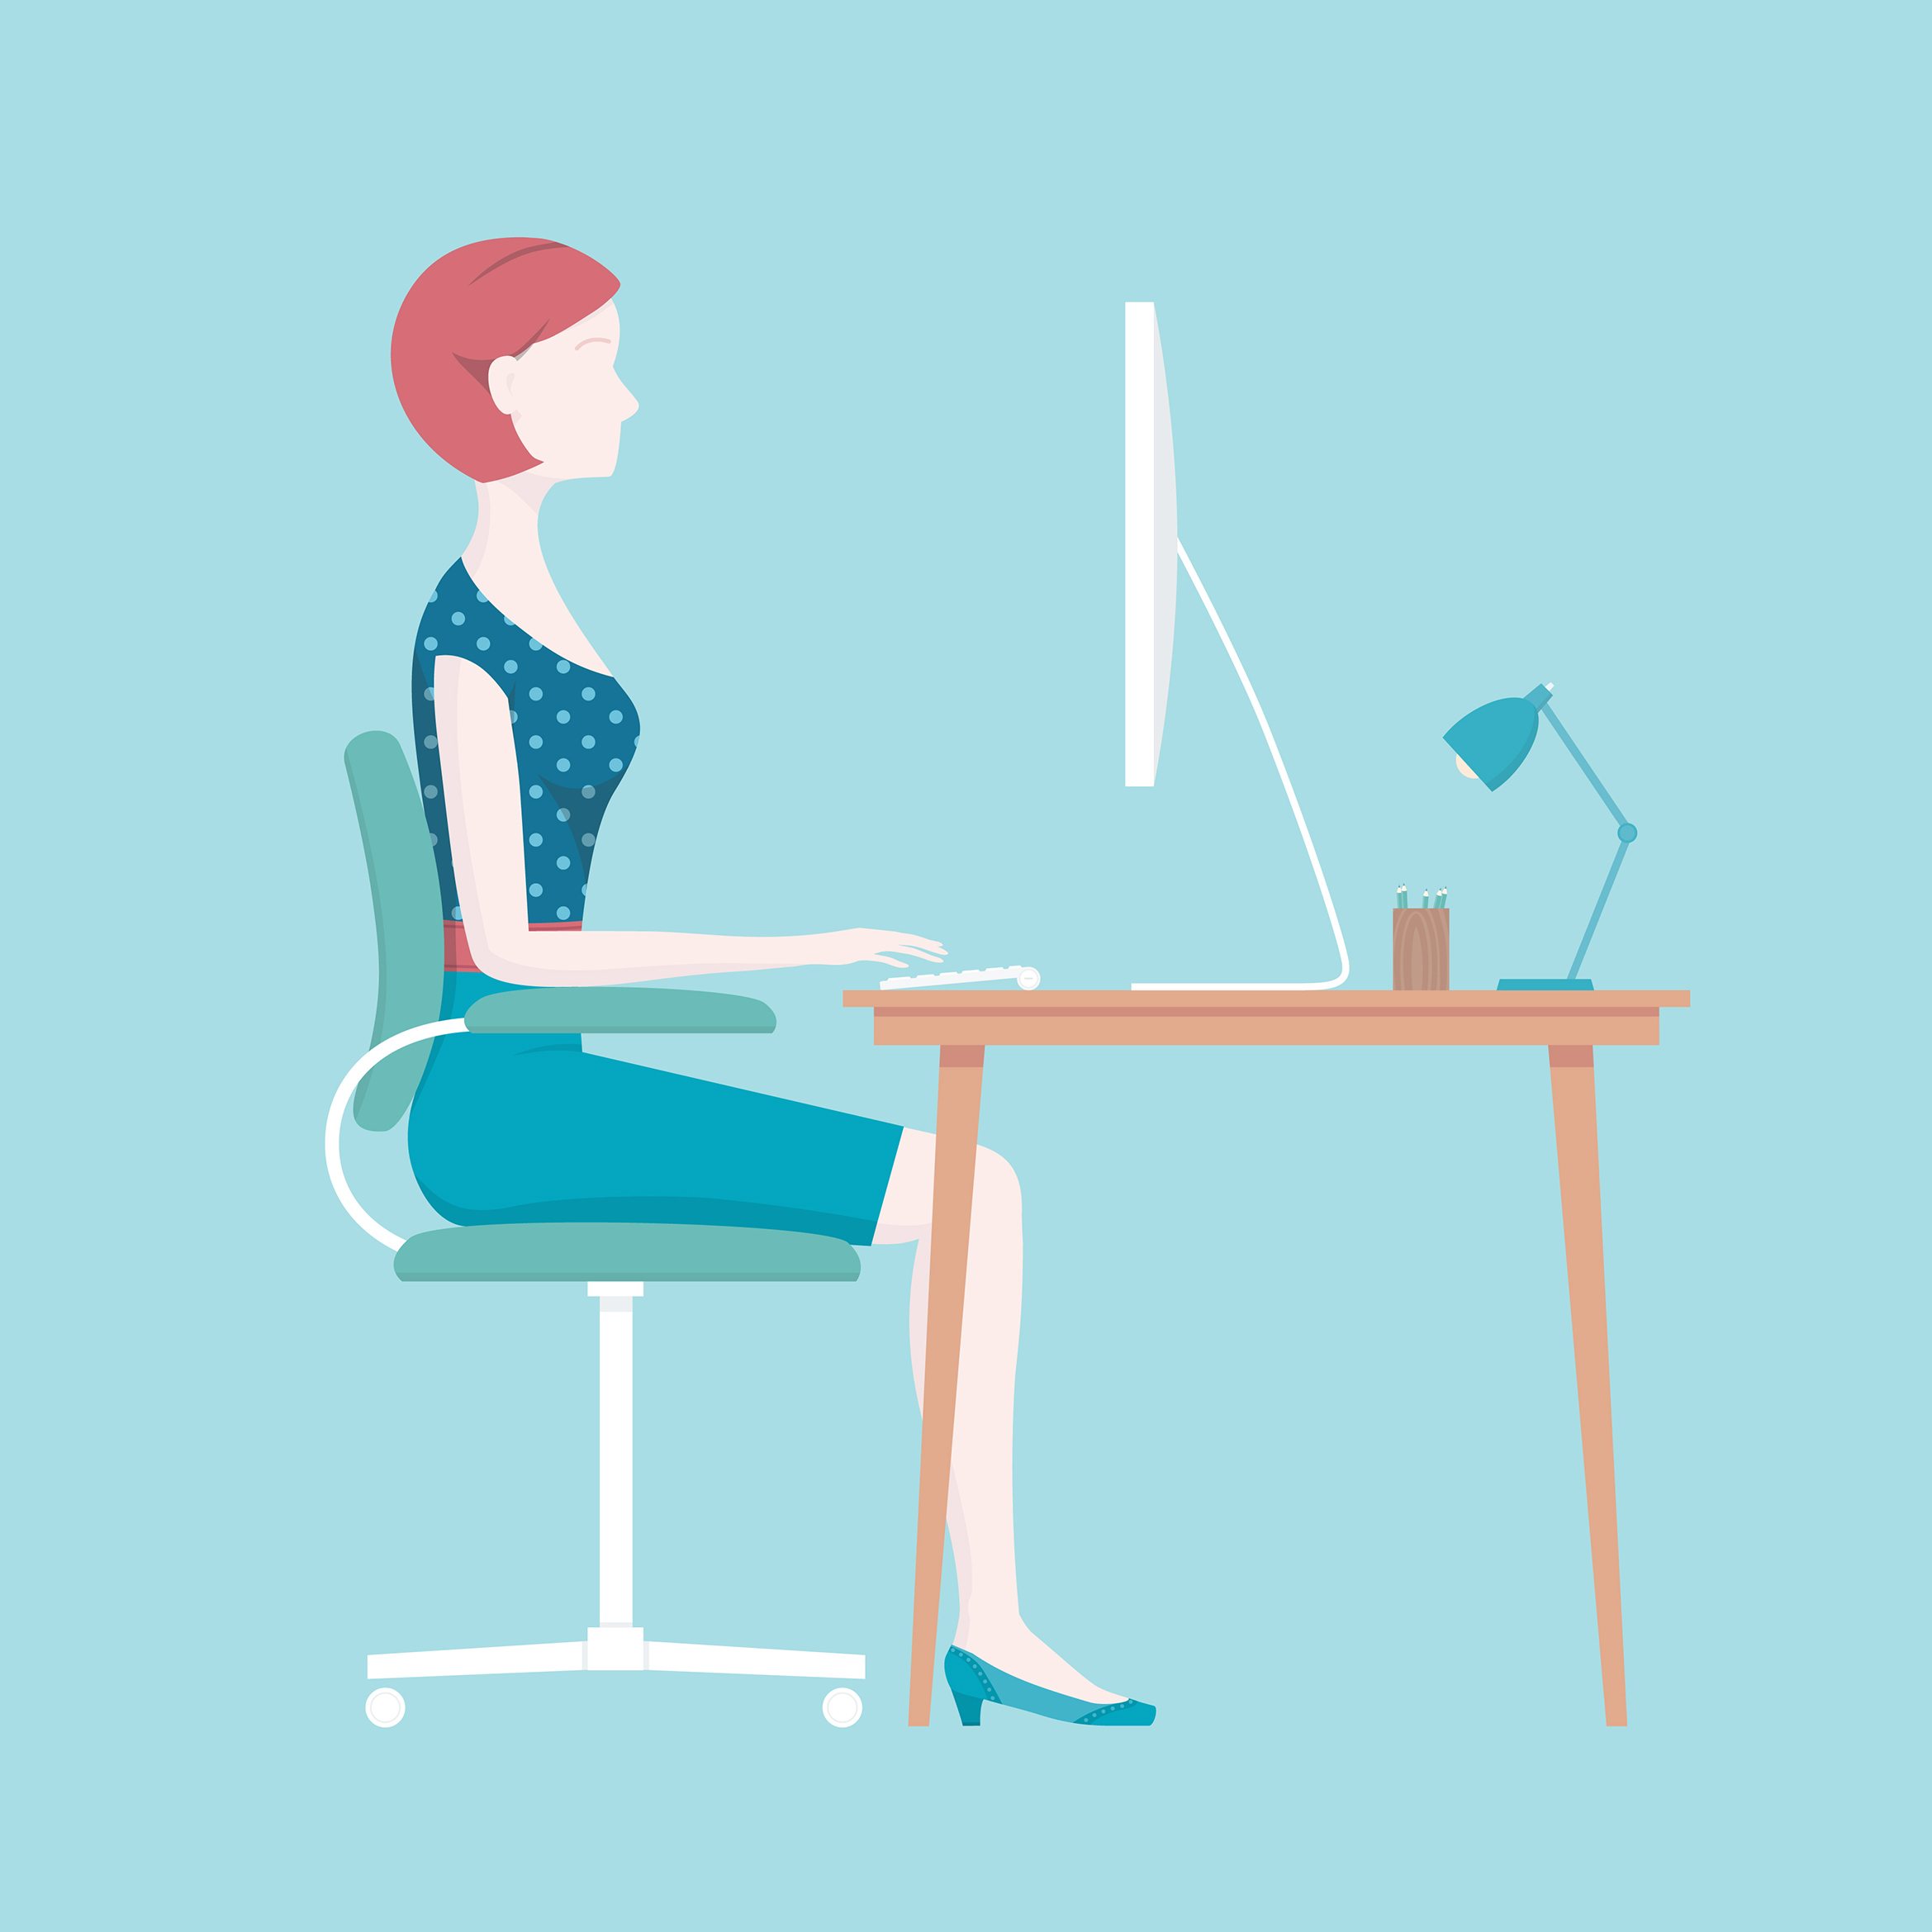 Specialists say that a proper sitting posture involves keeping your ears, shoulders and hips aligned, as well as maintaining the natural curve in your lower back. Proper posture can prevent chronic pain in the neck, back and shoulders, and headaches, they say.